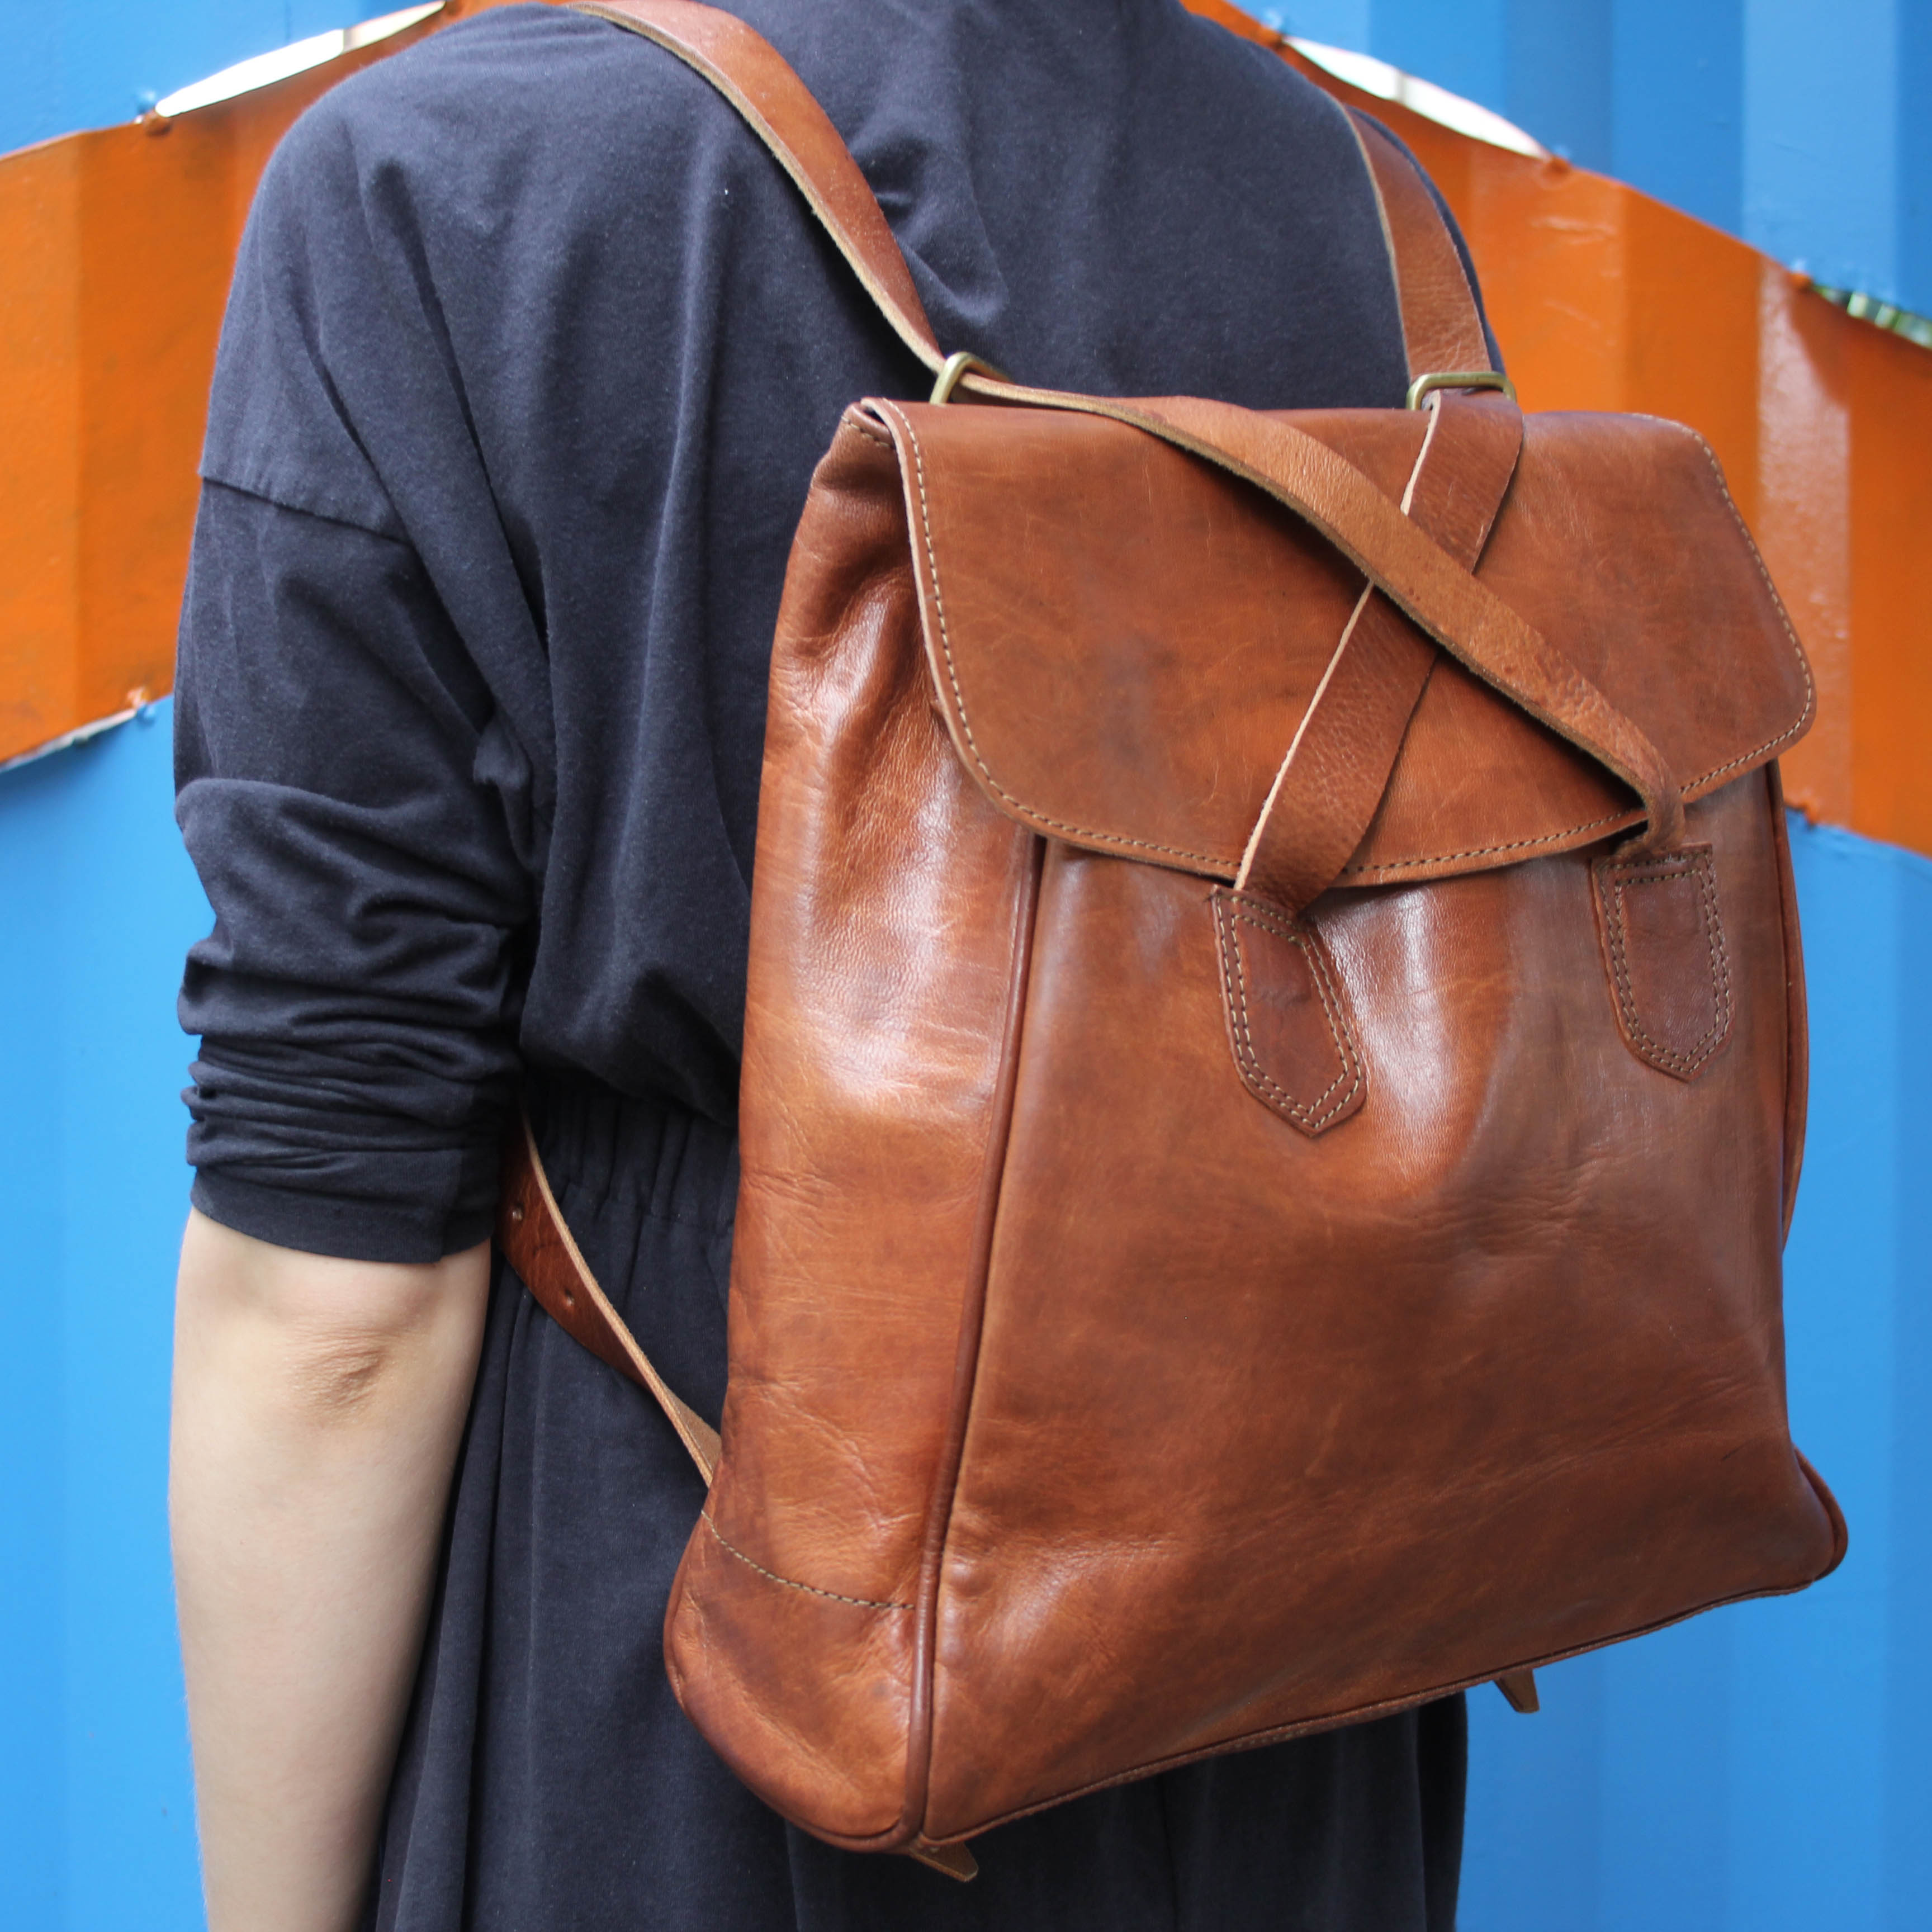 Backpack Tote Light Brown Leather Bag